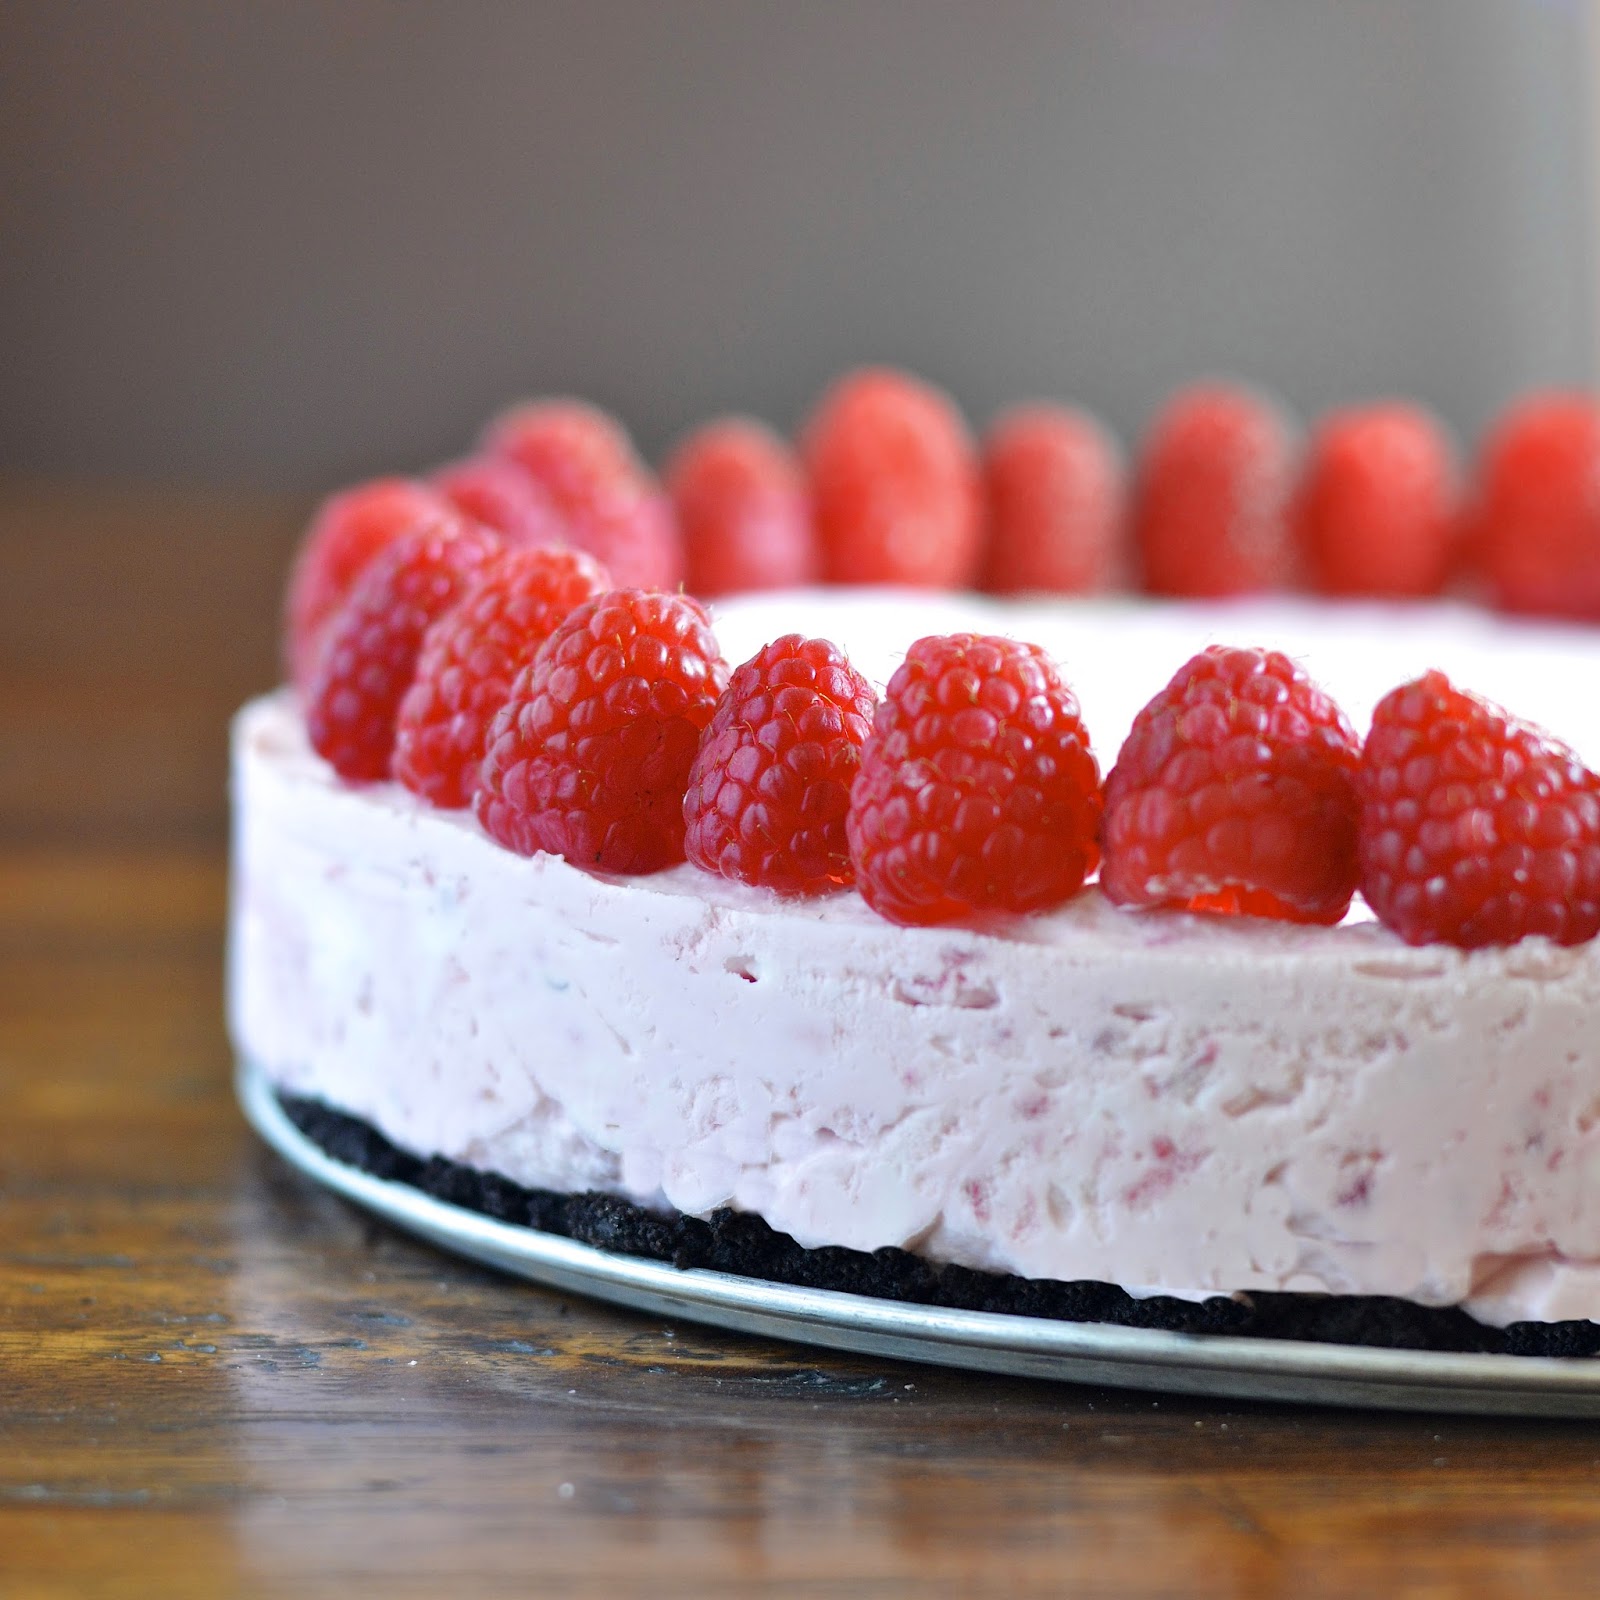 This frozen raspberry cheesecake is easy to make and decadent.